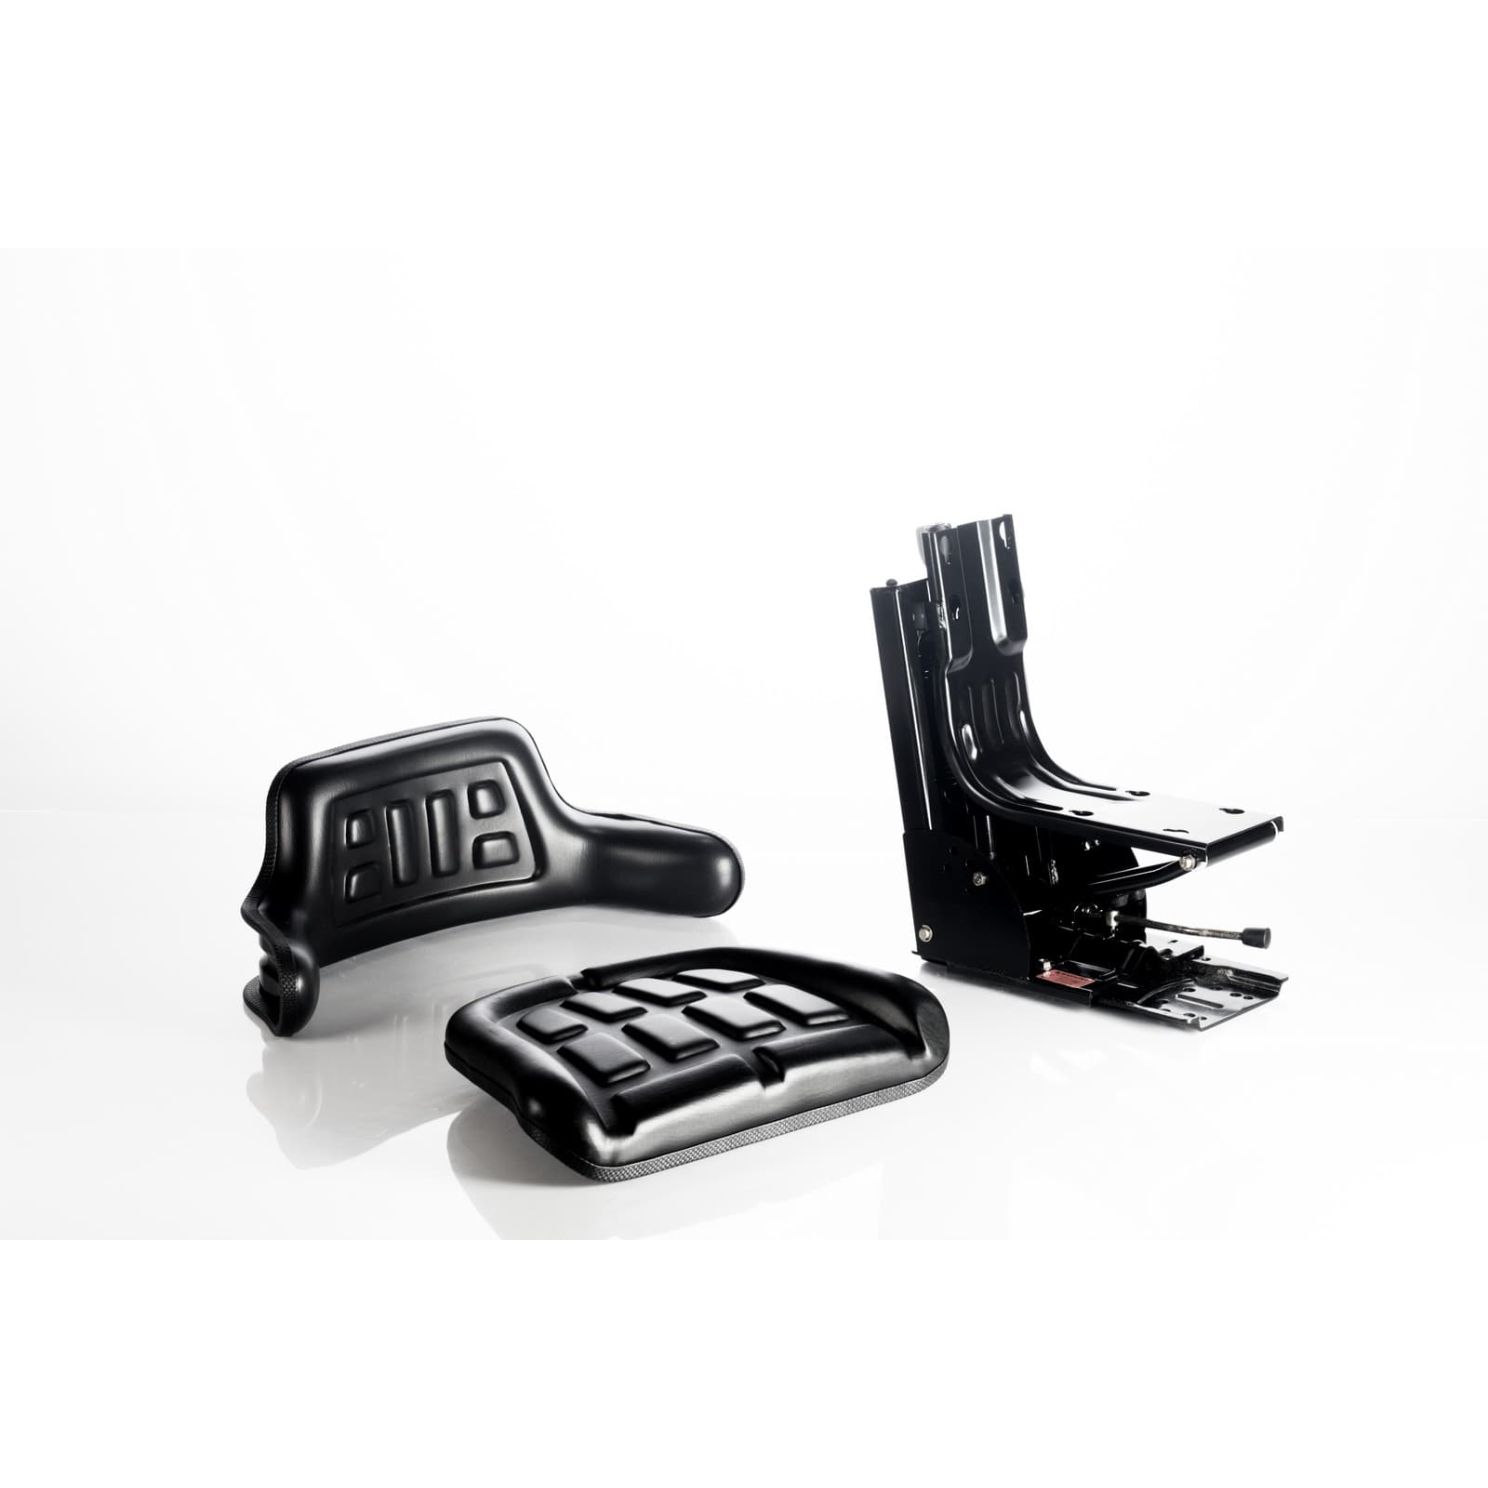 510-Universal Tractor Seat with Suspension - Black